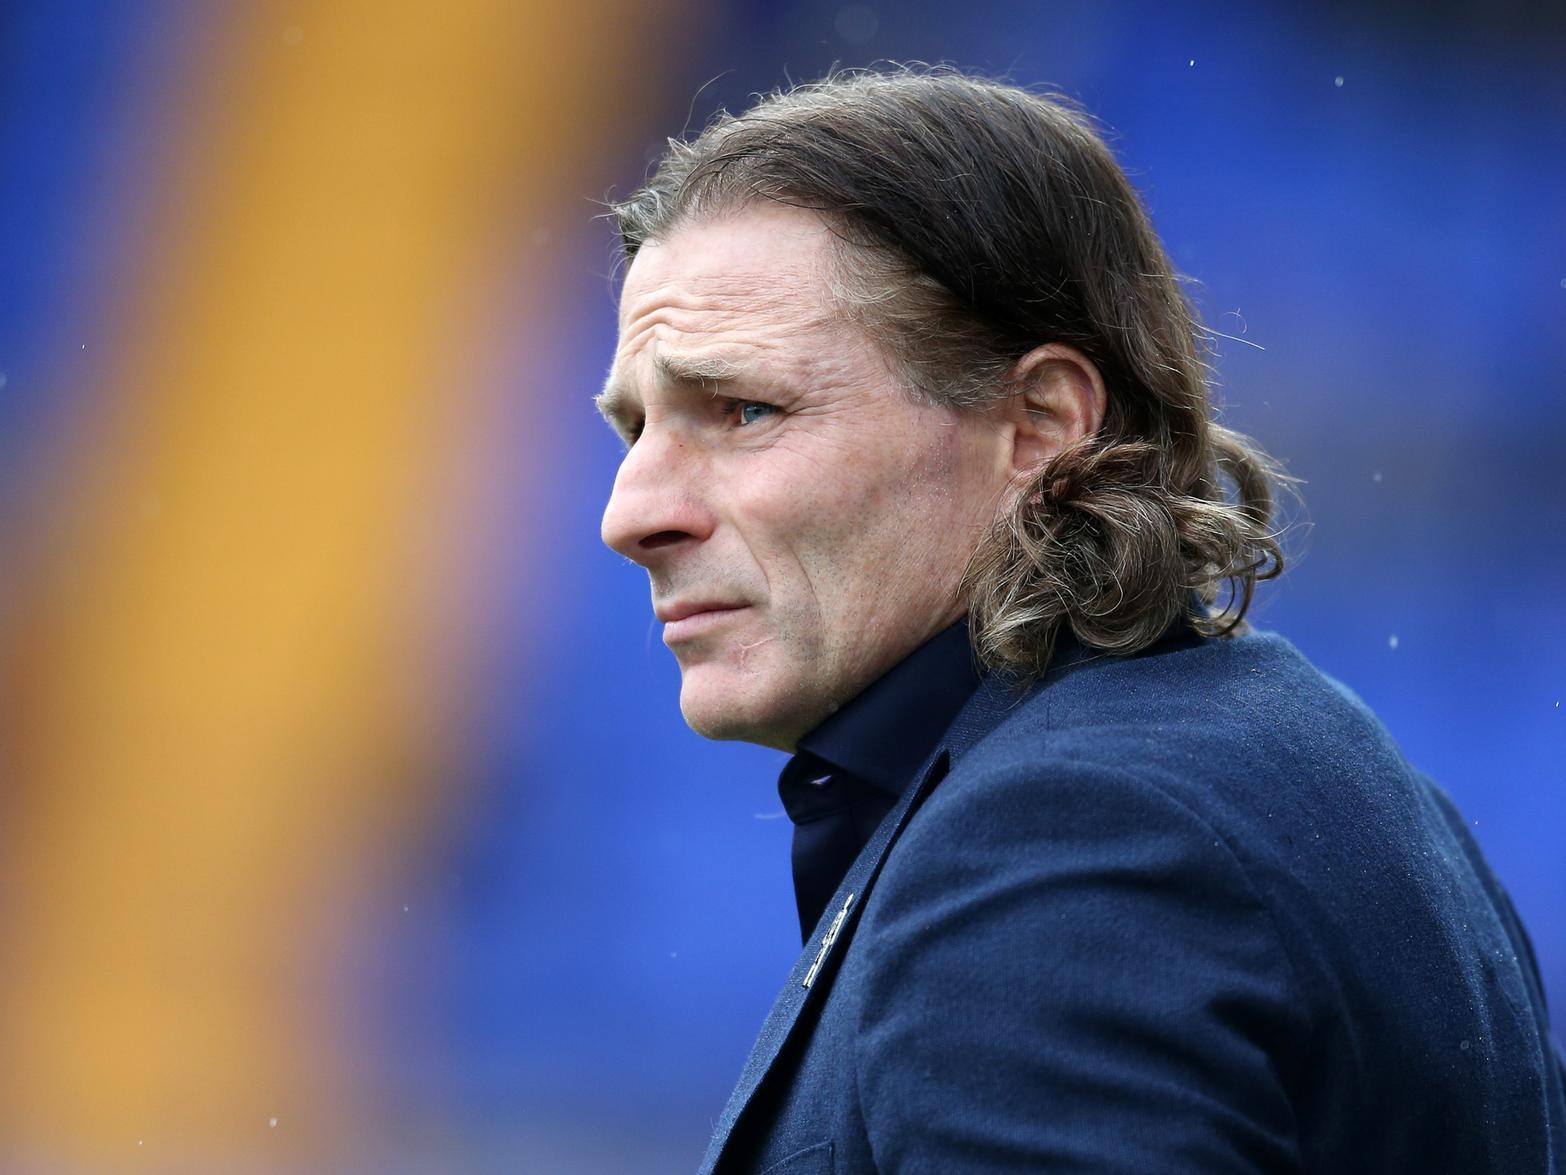 QPR are set to axe Mark Warburton and make an approach for current Wycombe manager Gareth Ainsworth. (TeamTalk)